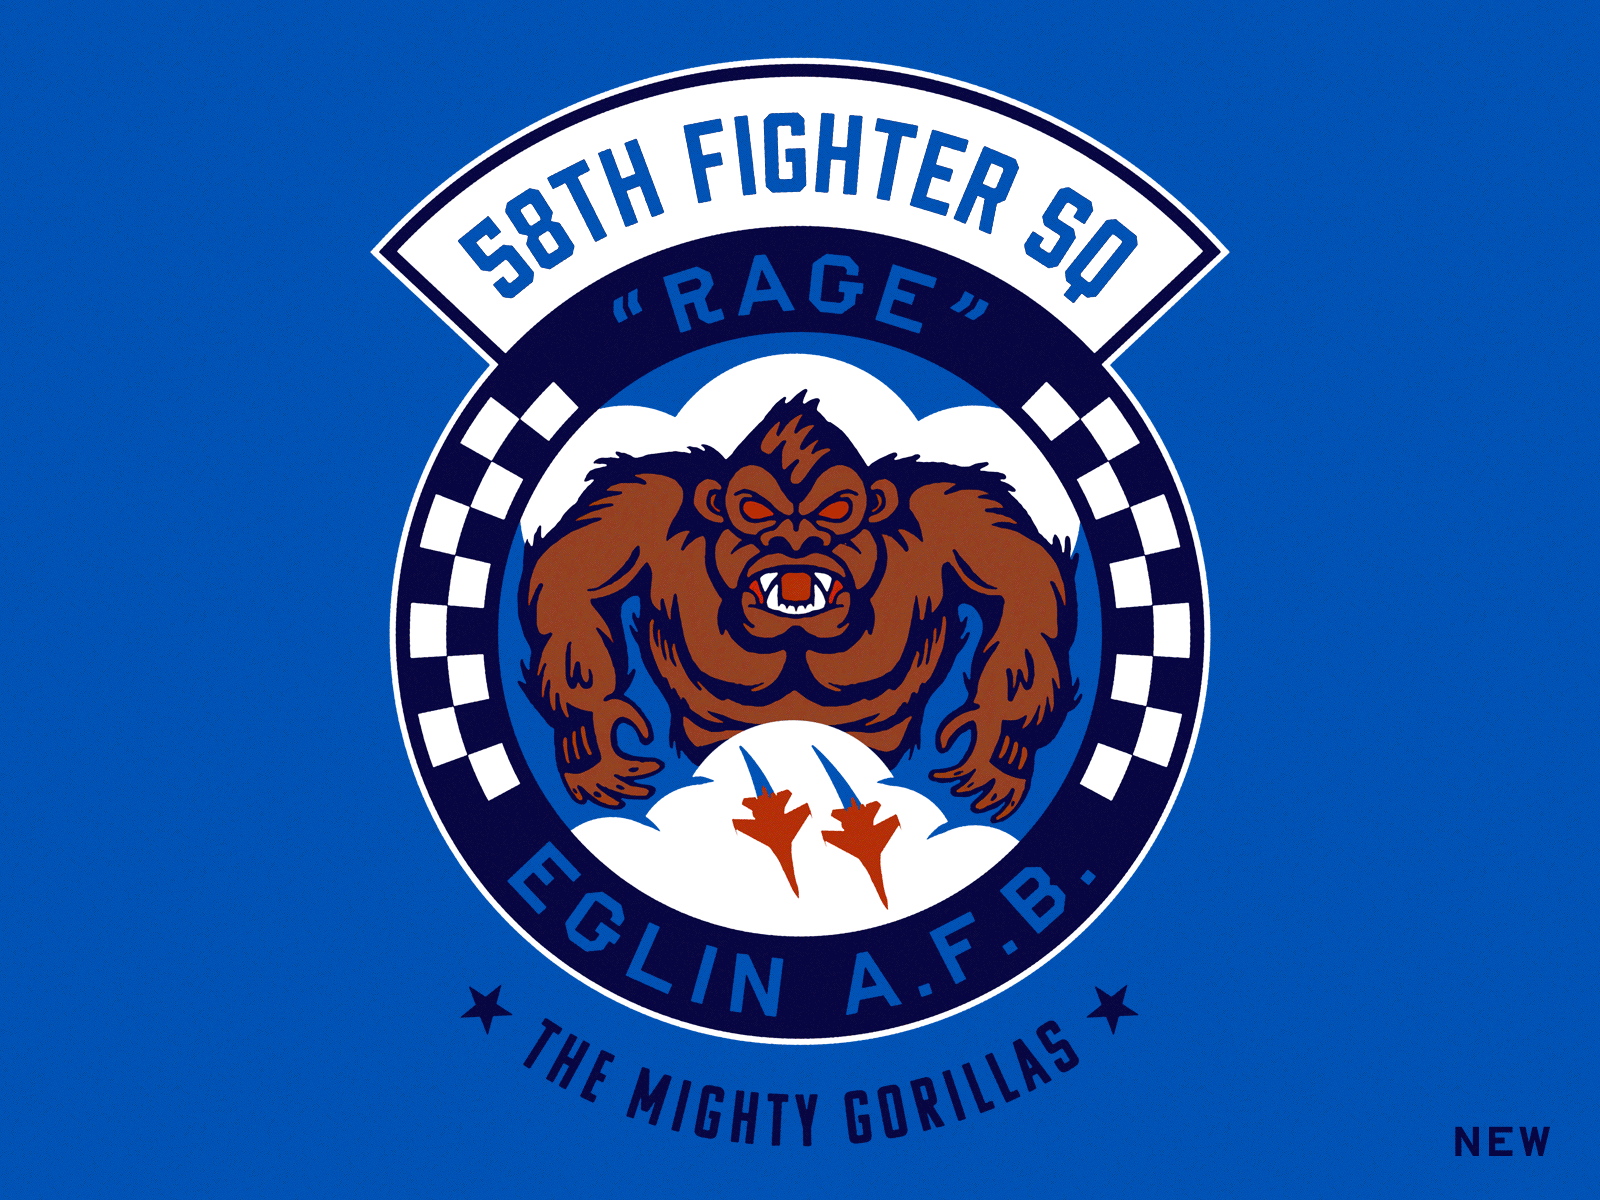 58th Fighter Squadron Patch by Bret Hawkins on Dribbble